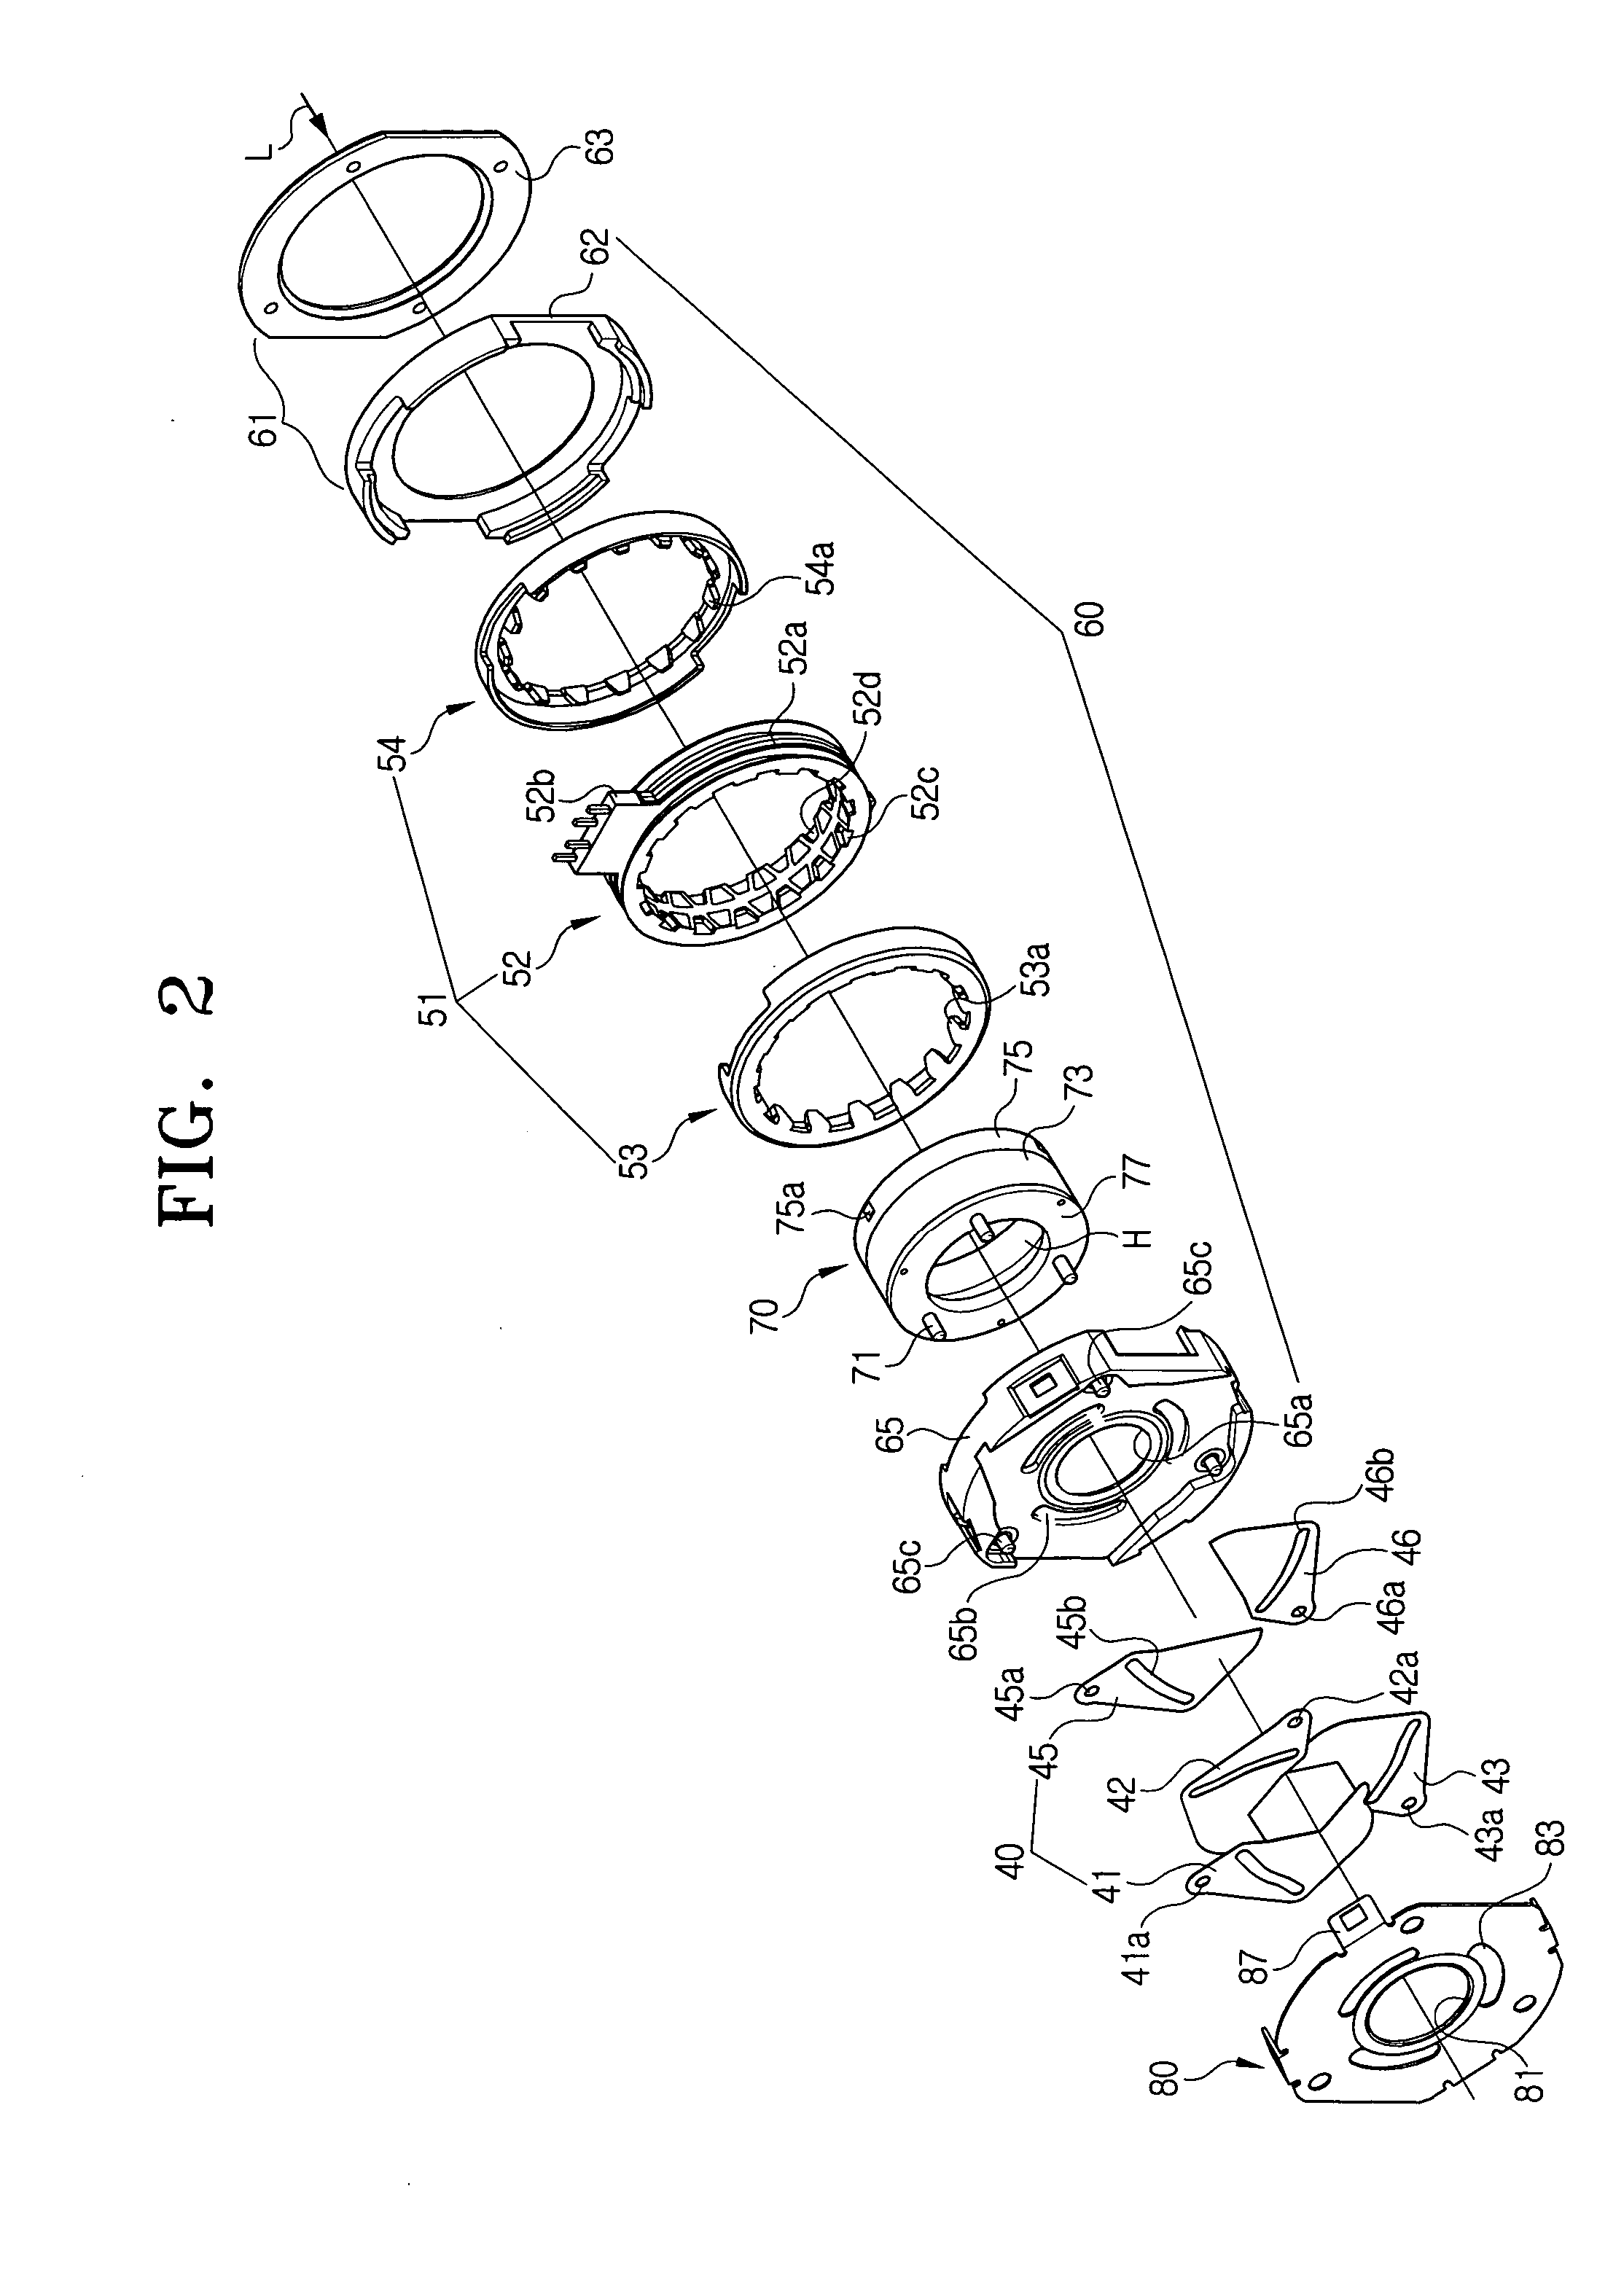 Iris diaphragm device, diaphragm driving device and camera unit including the same, and diaphragm control method